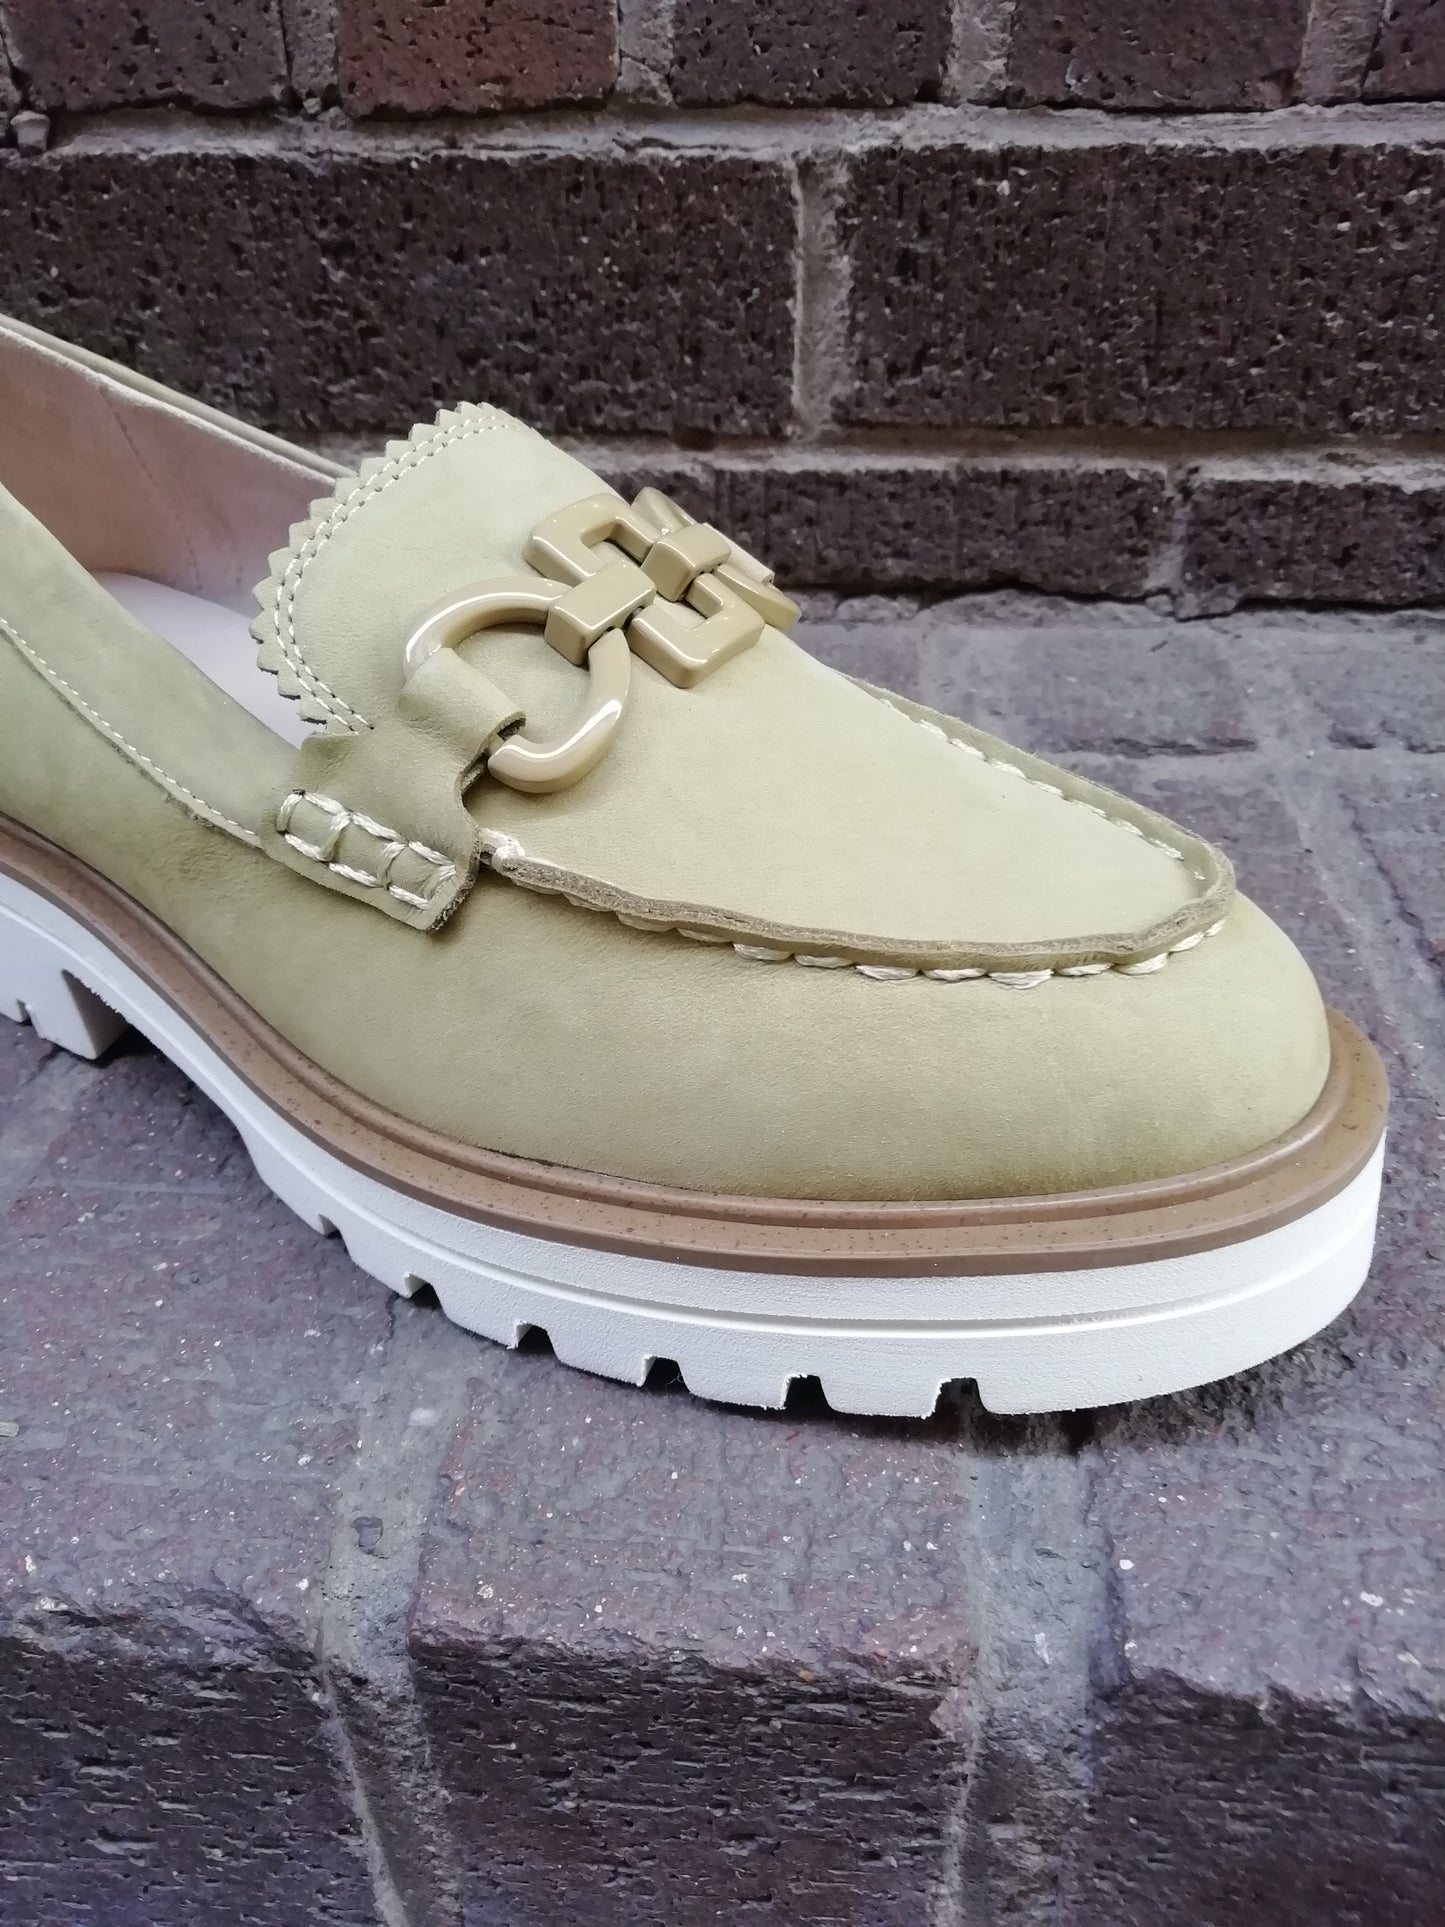 Caprice Green Nubuck Loafer. Only sizes 4, 6 and 7.5 left.